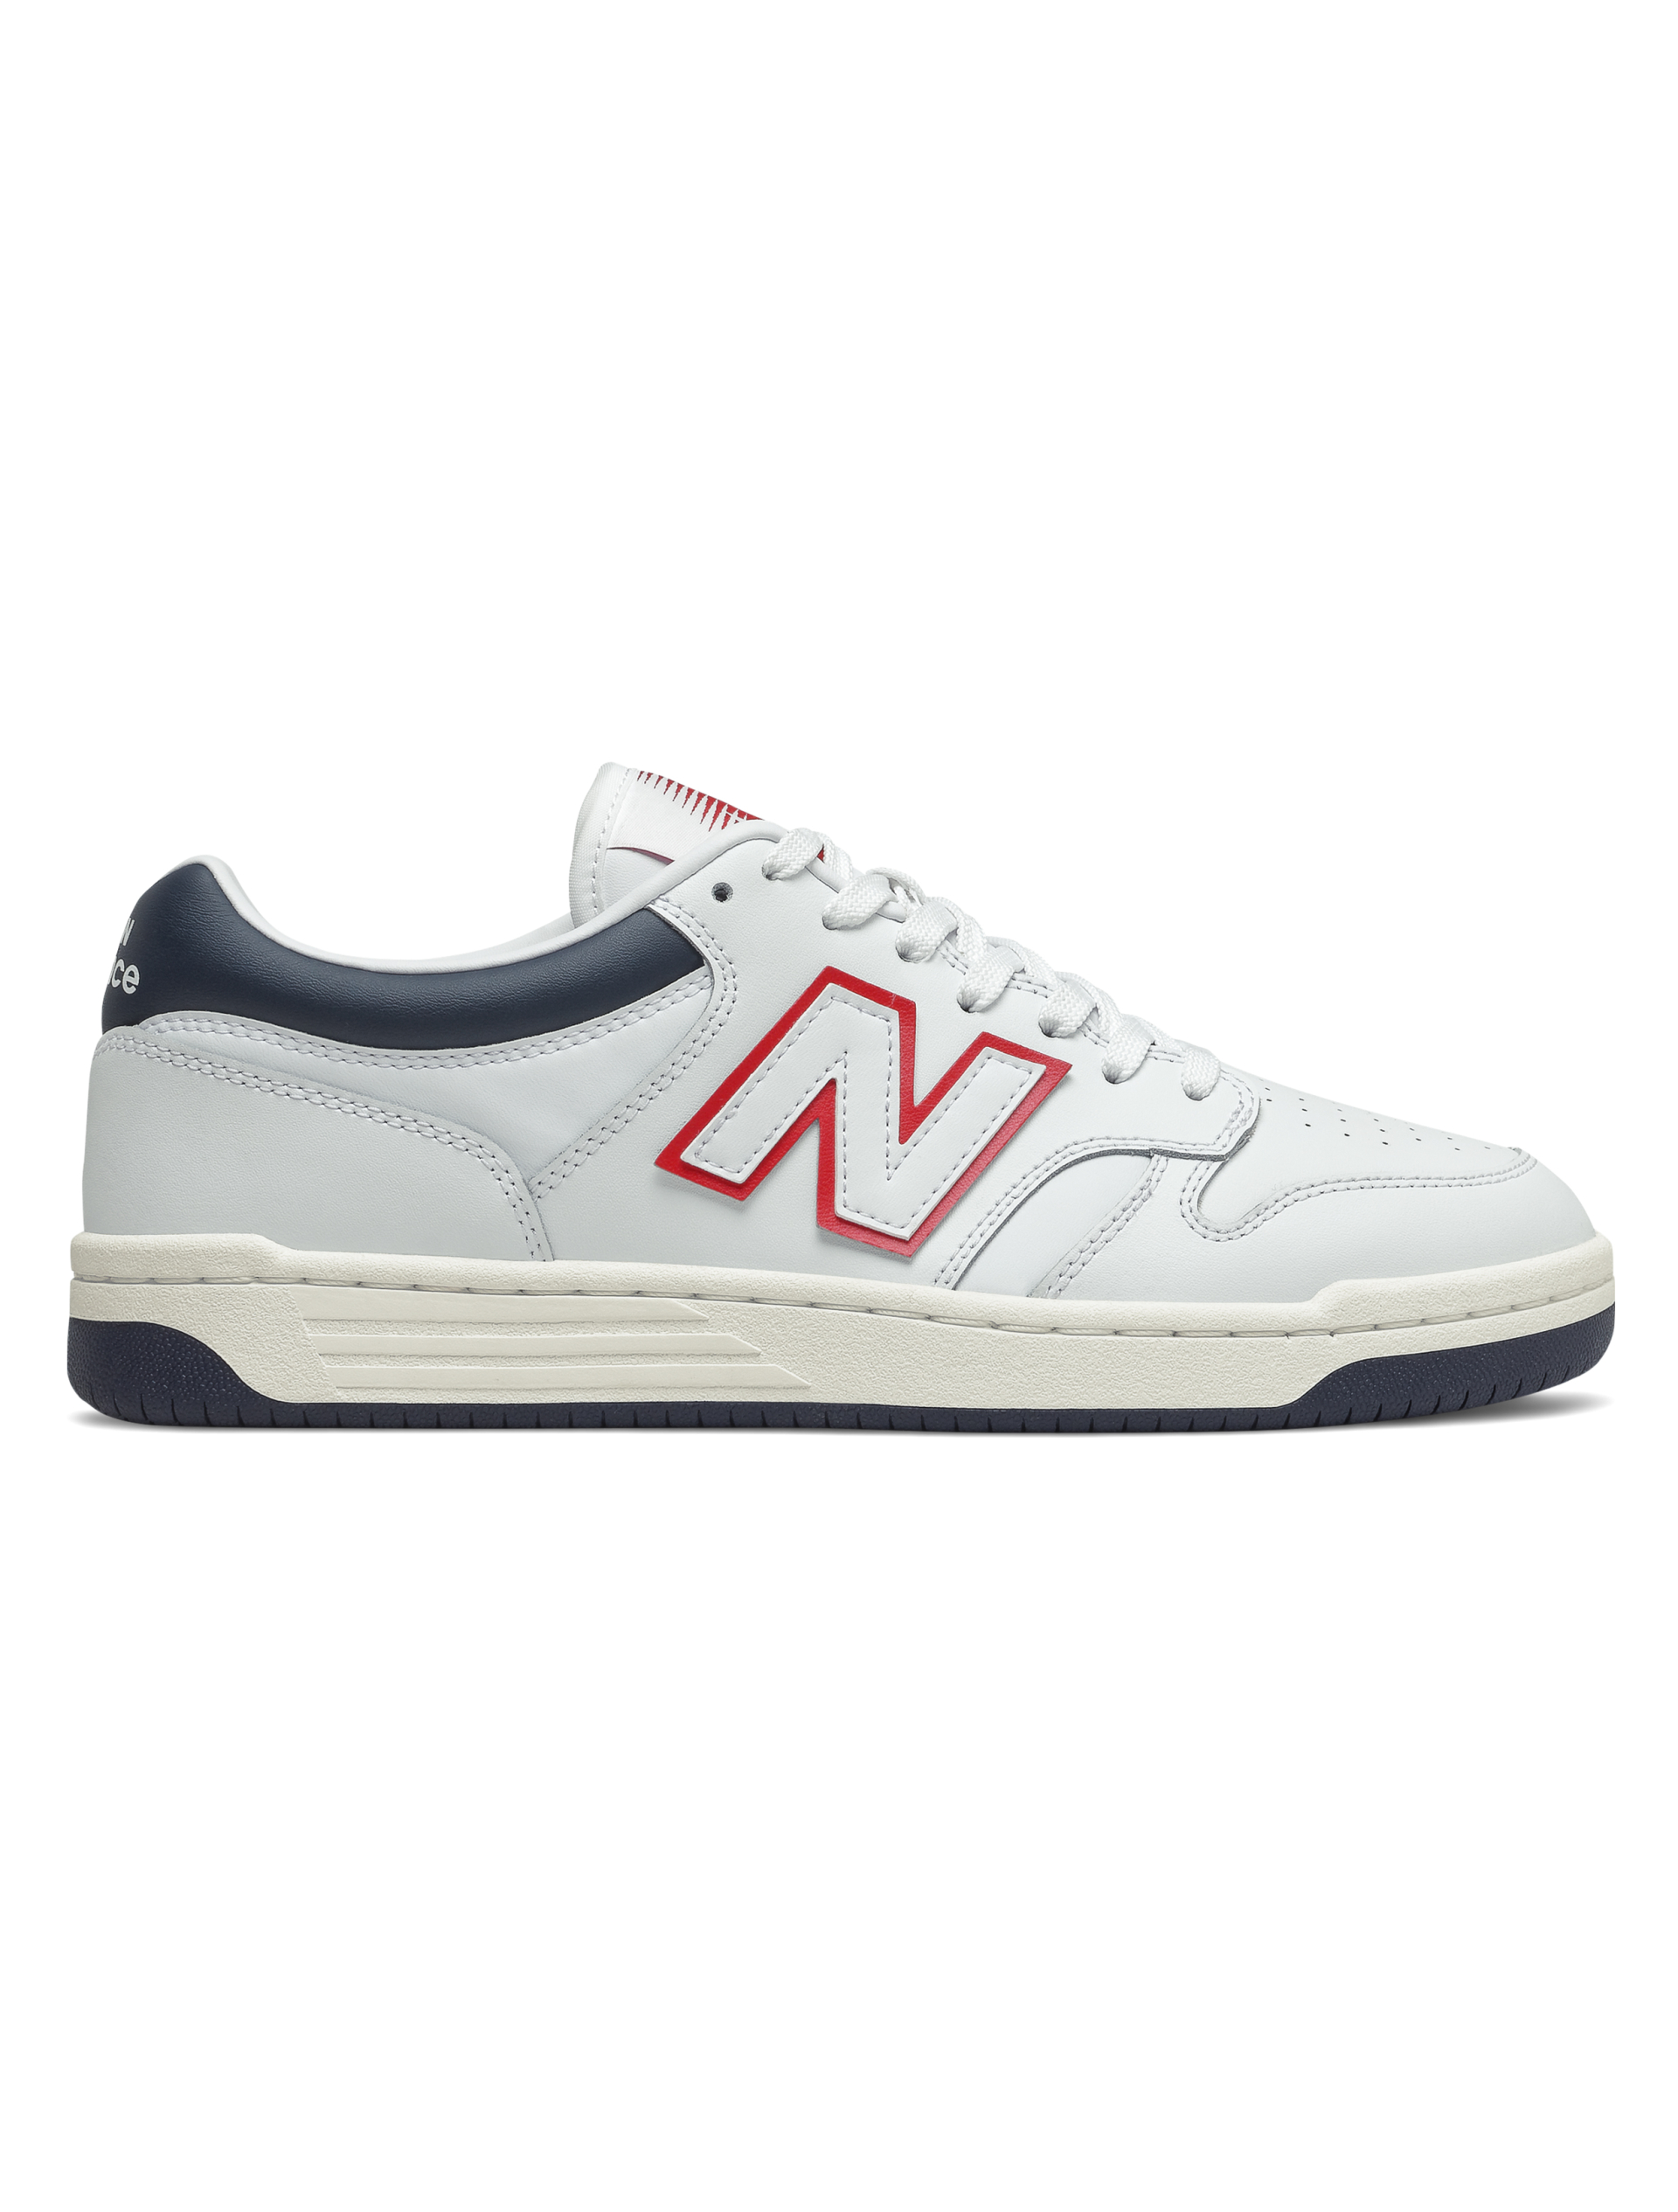 New Balance Sneakers hvid / lwg white red